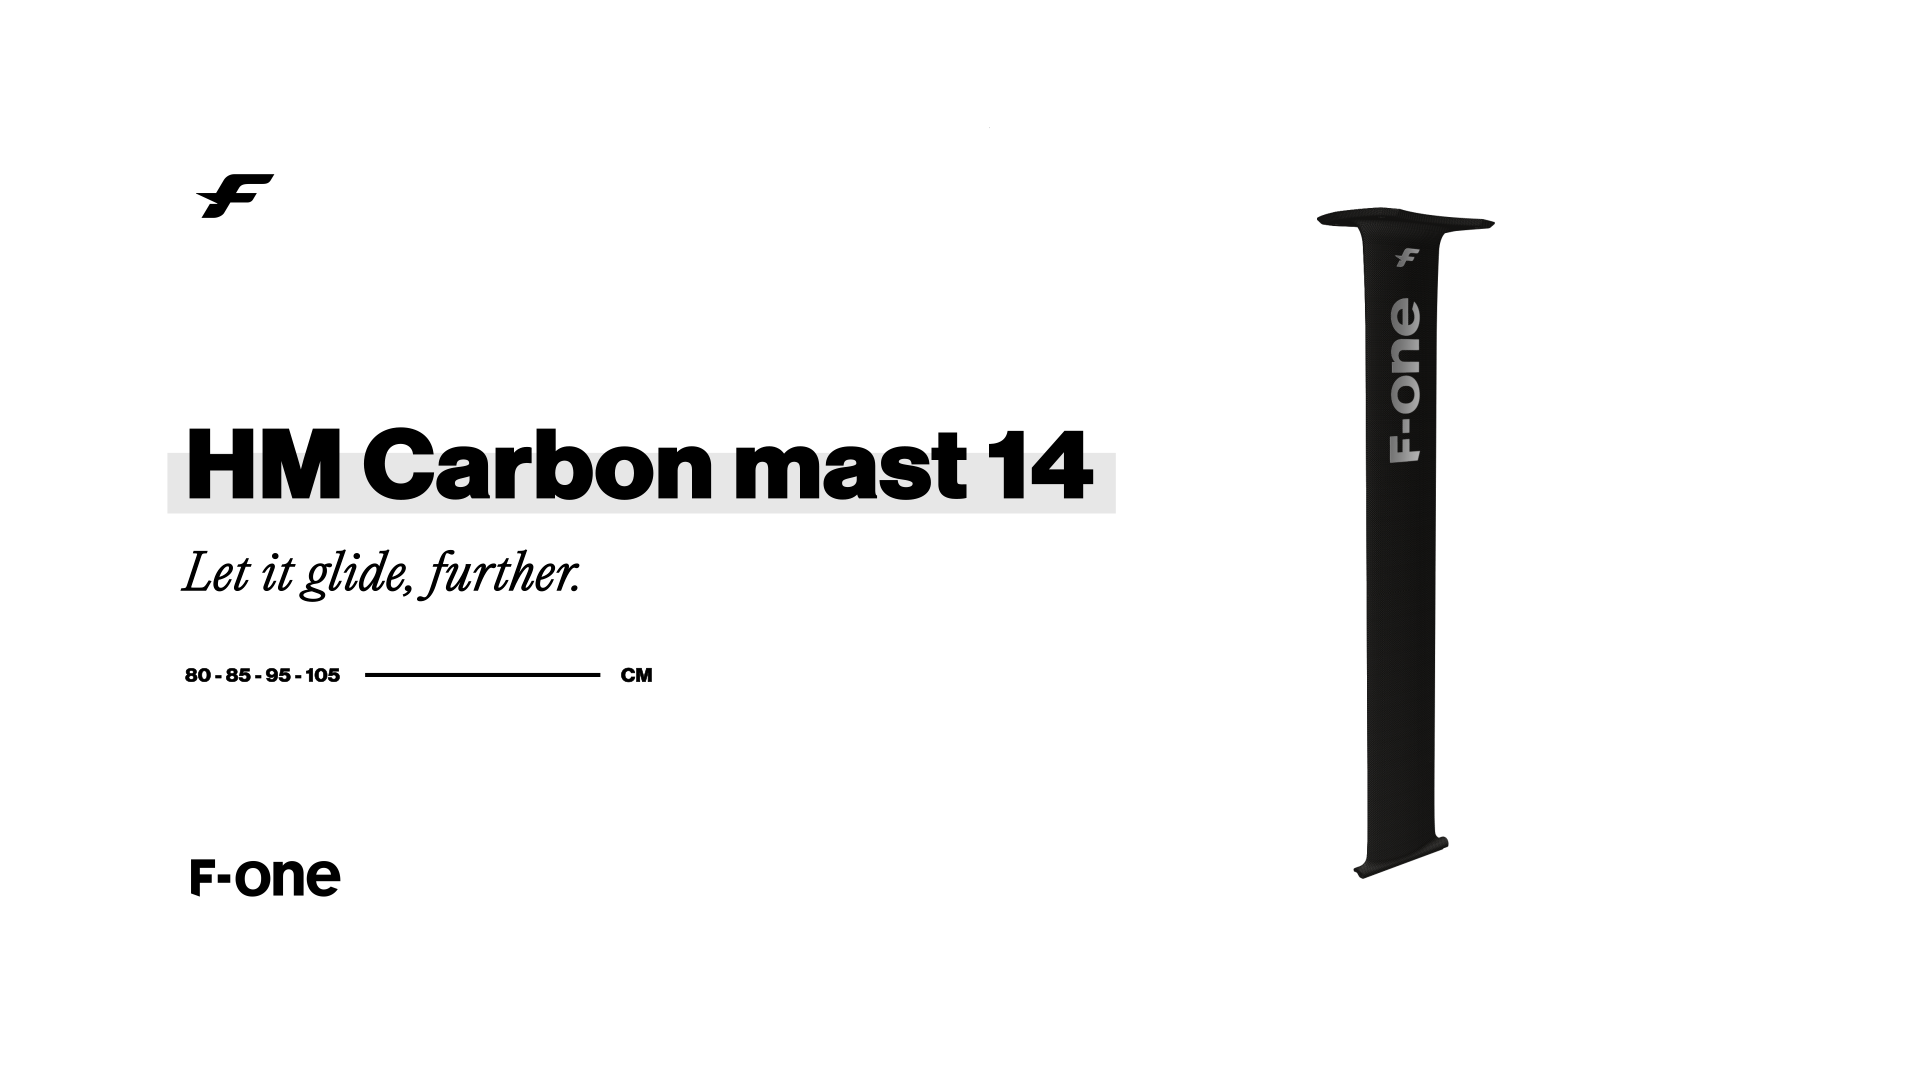 The new Carbon masts are out 19